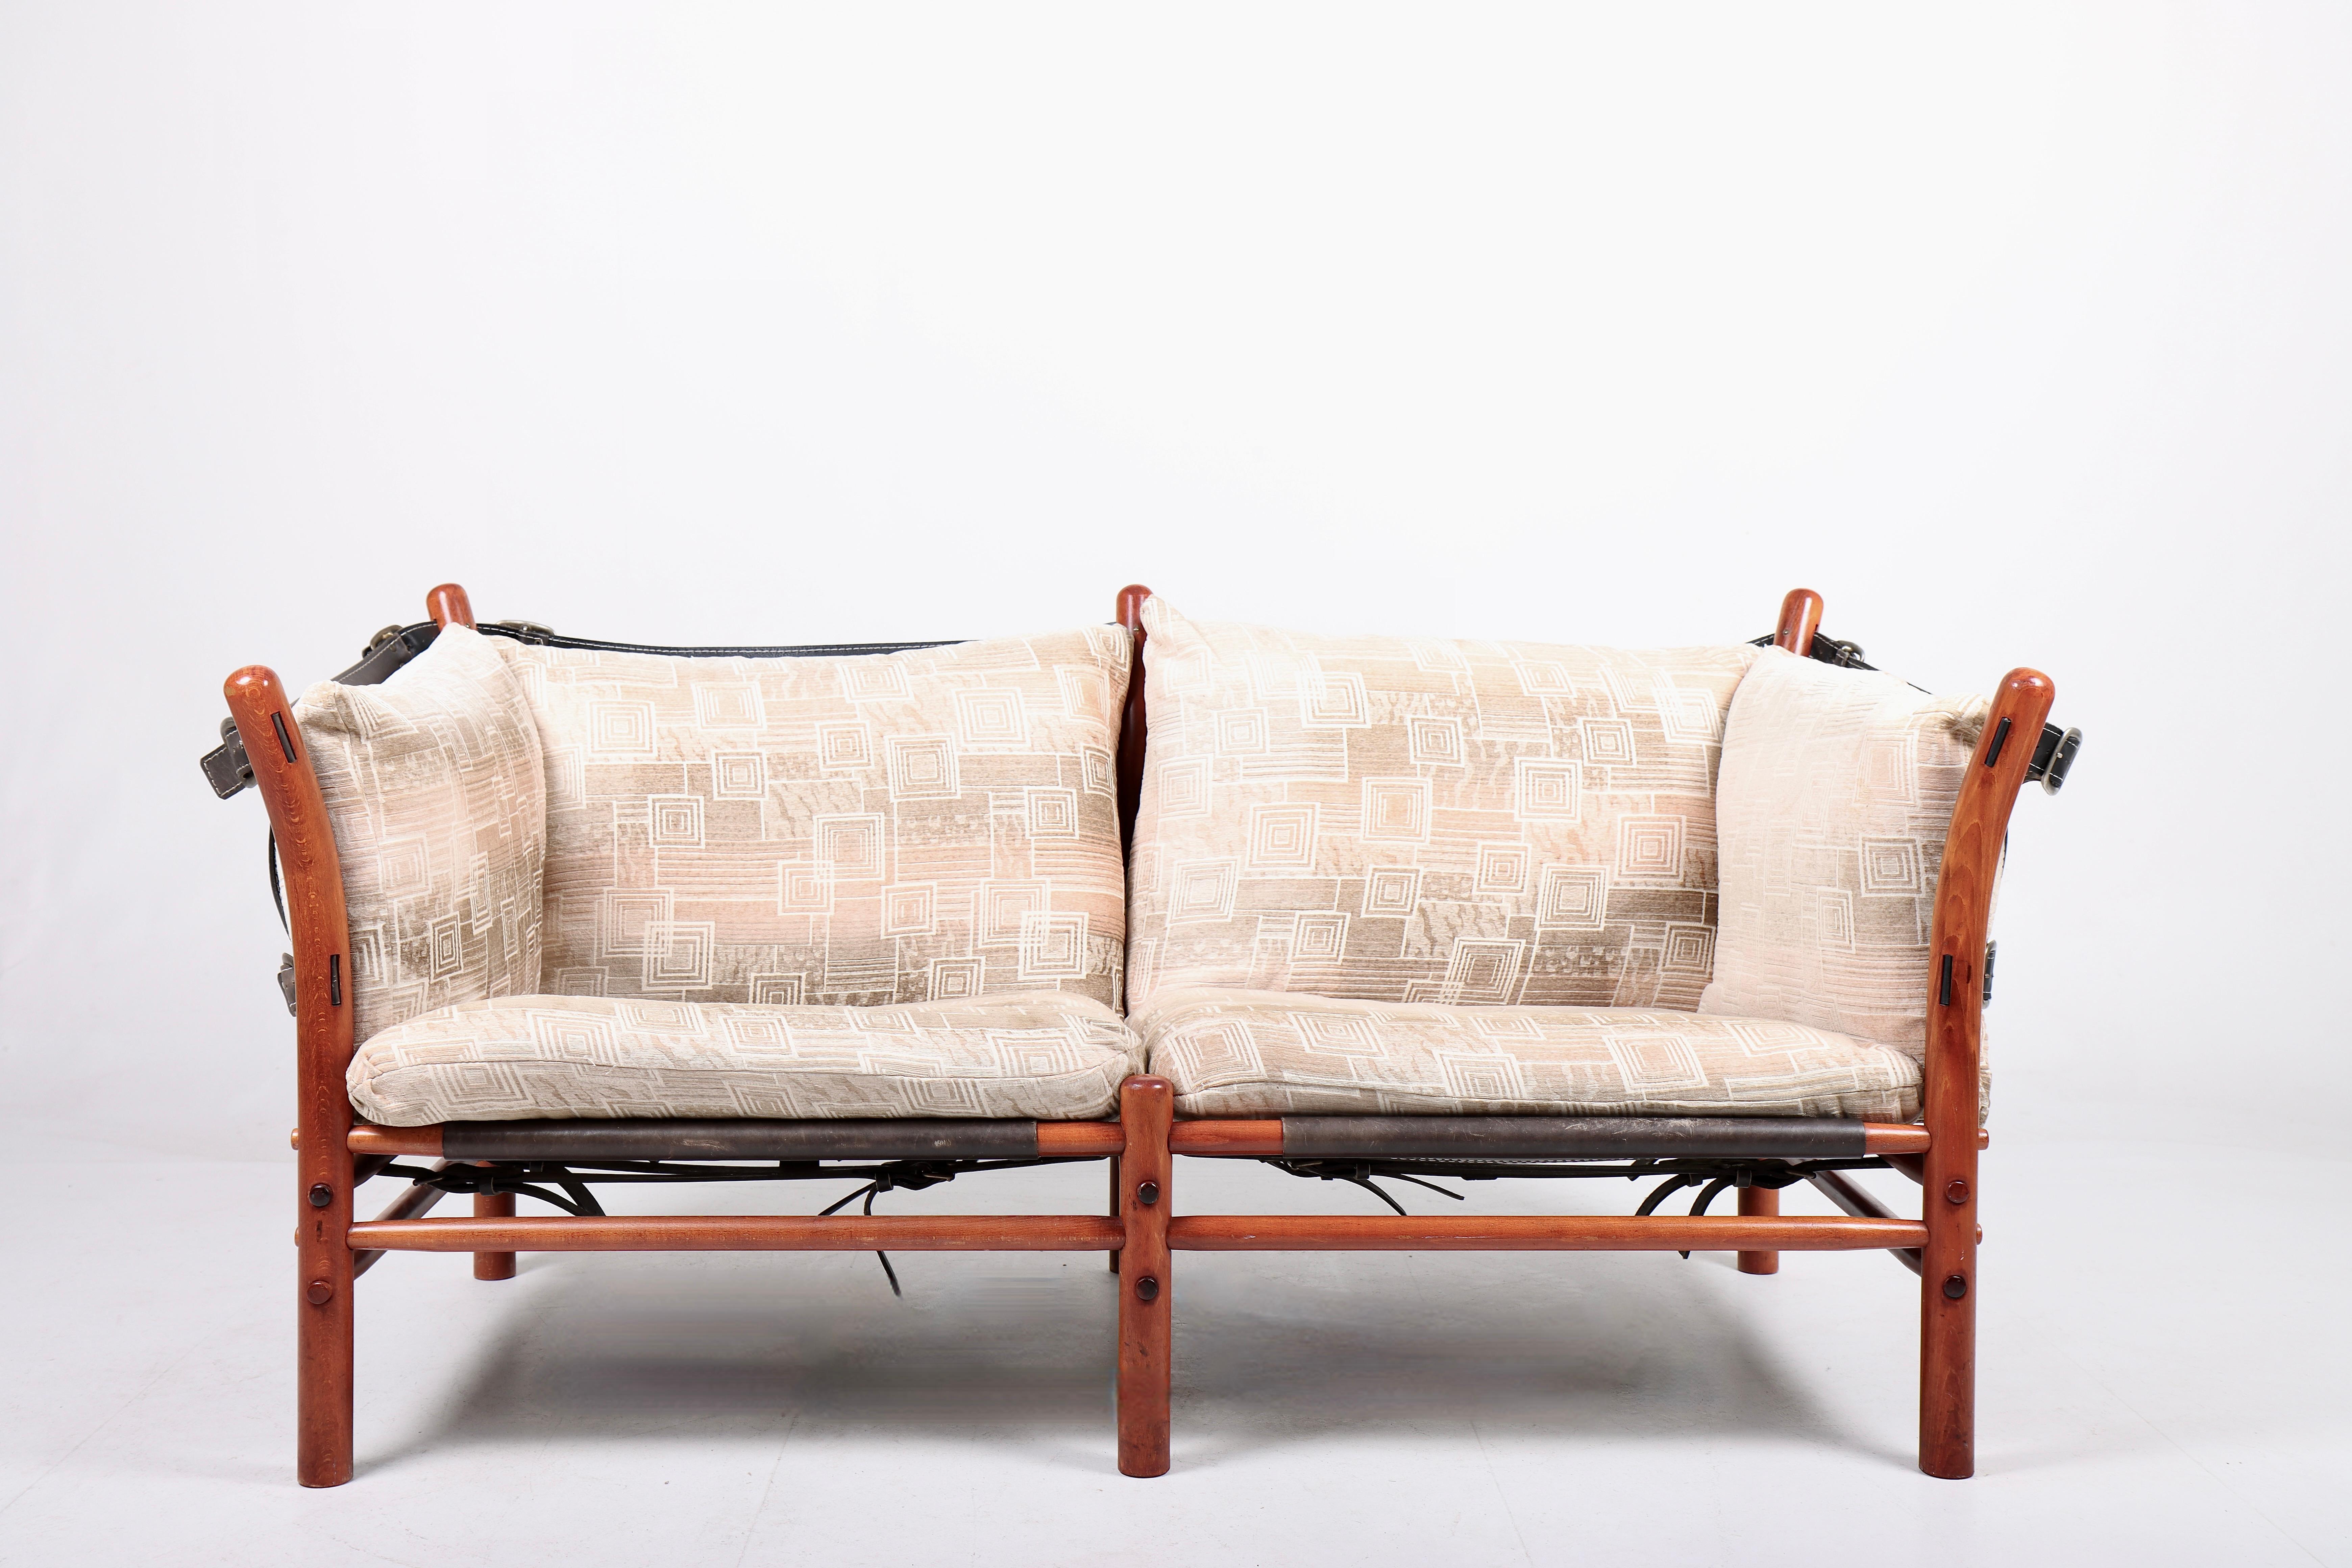 Midcentury Sofa by Arne Norell, Made in Sweden, 1960s